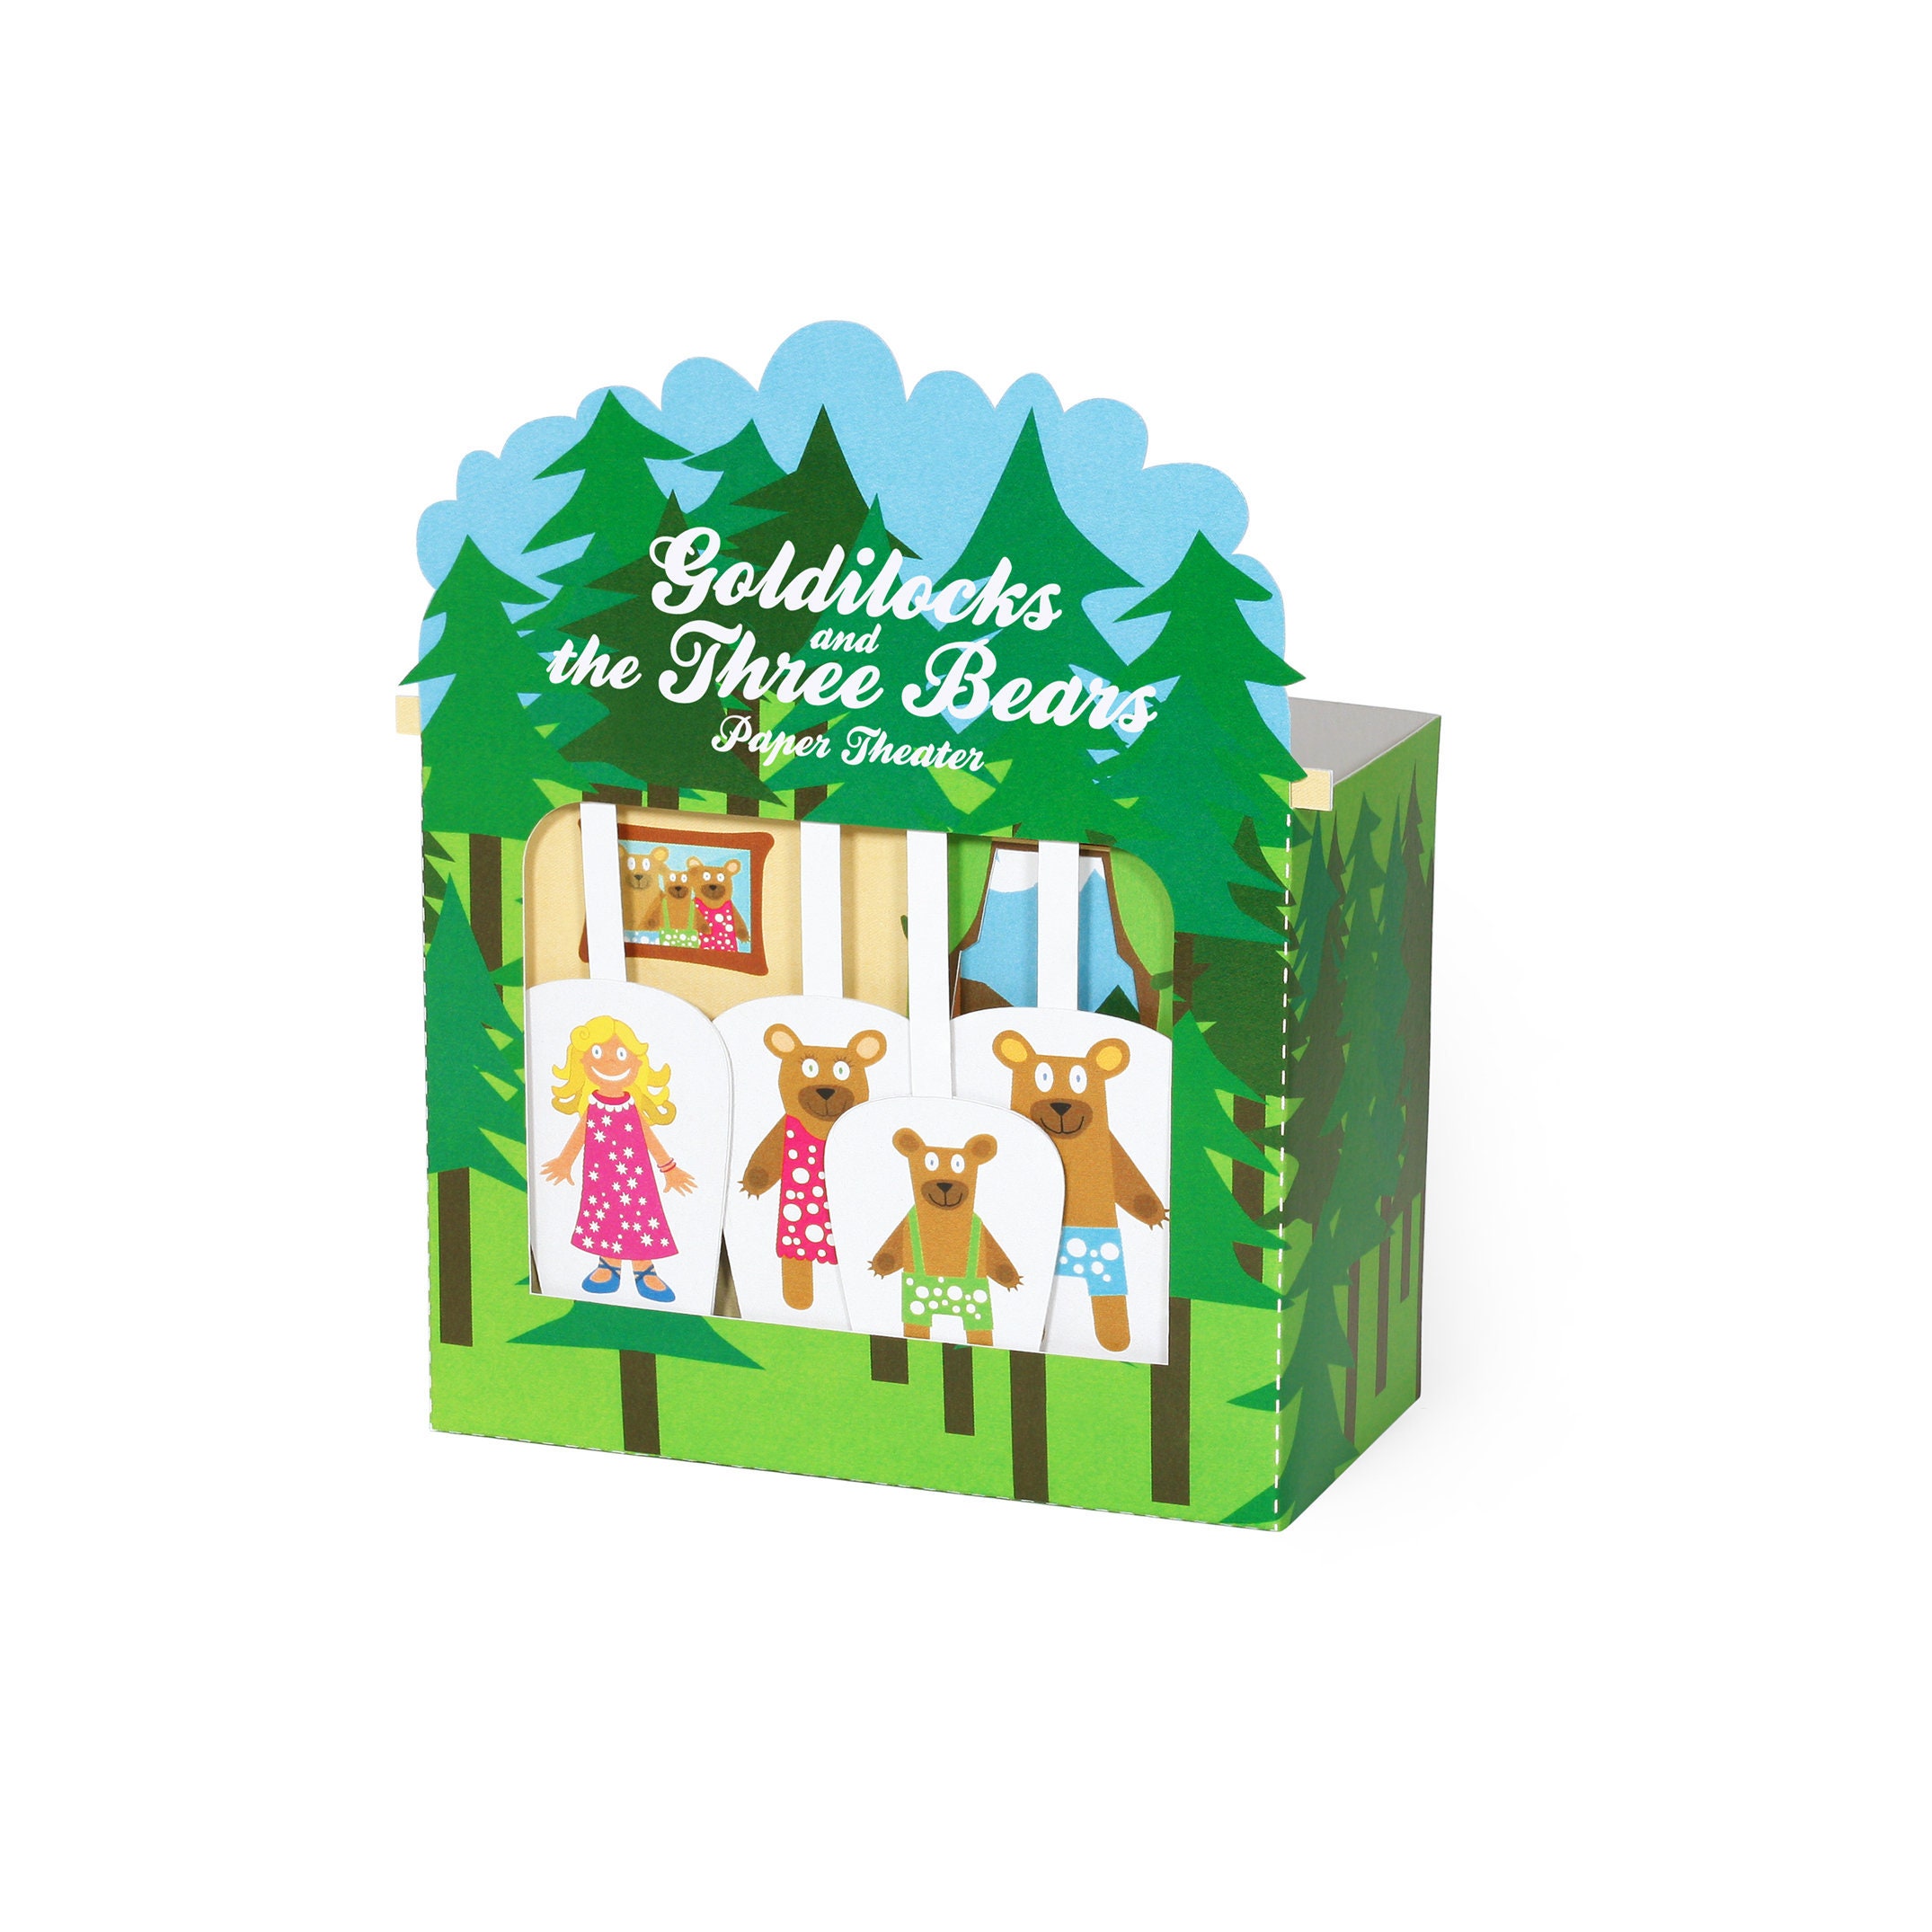 Goldilocks And The Three Bears Paper Theater Diy Paper Craft Etsy